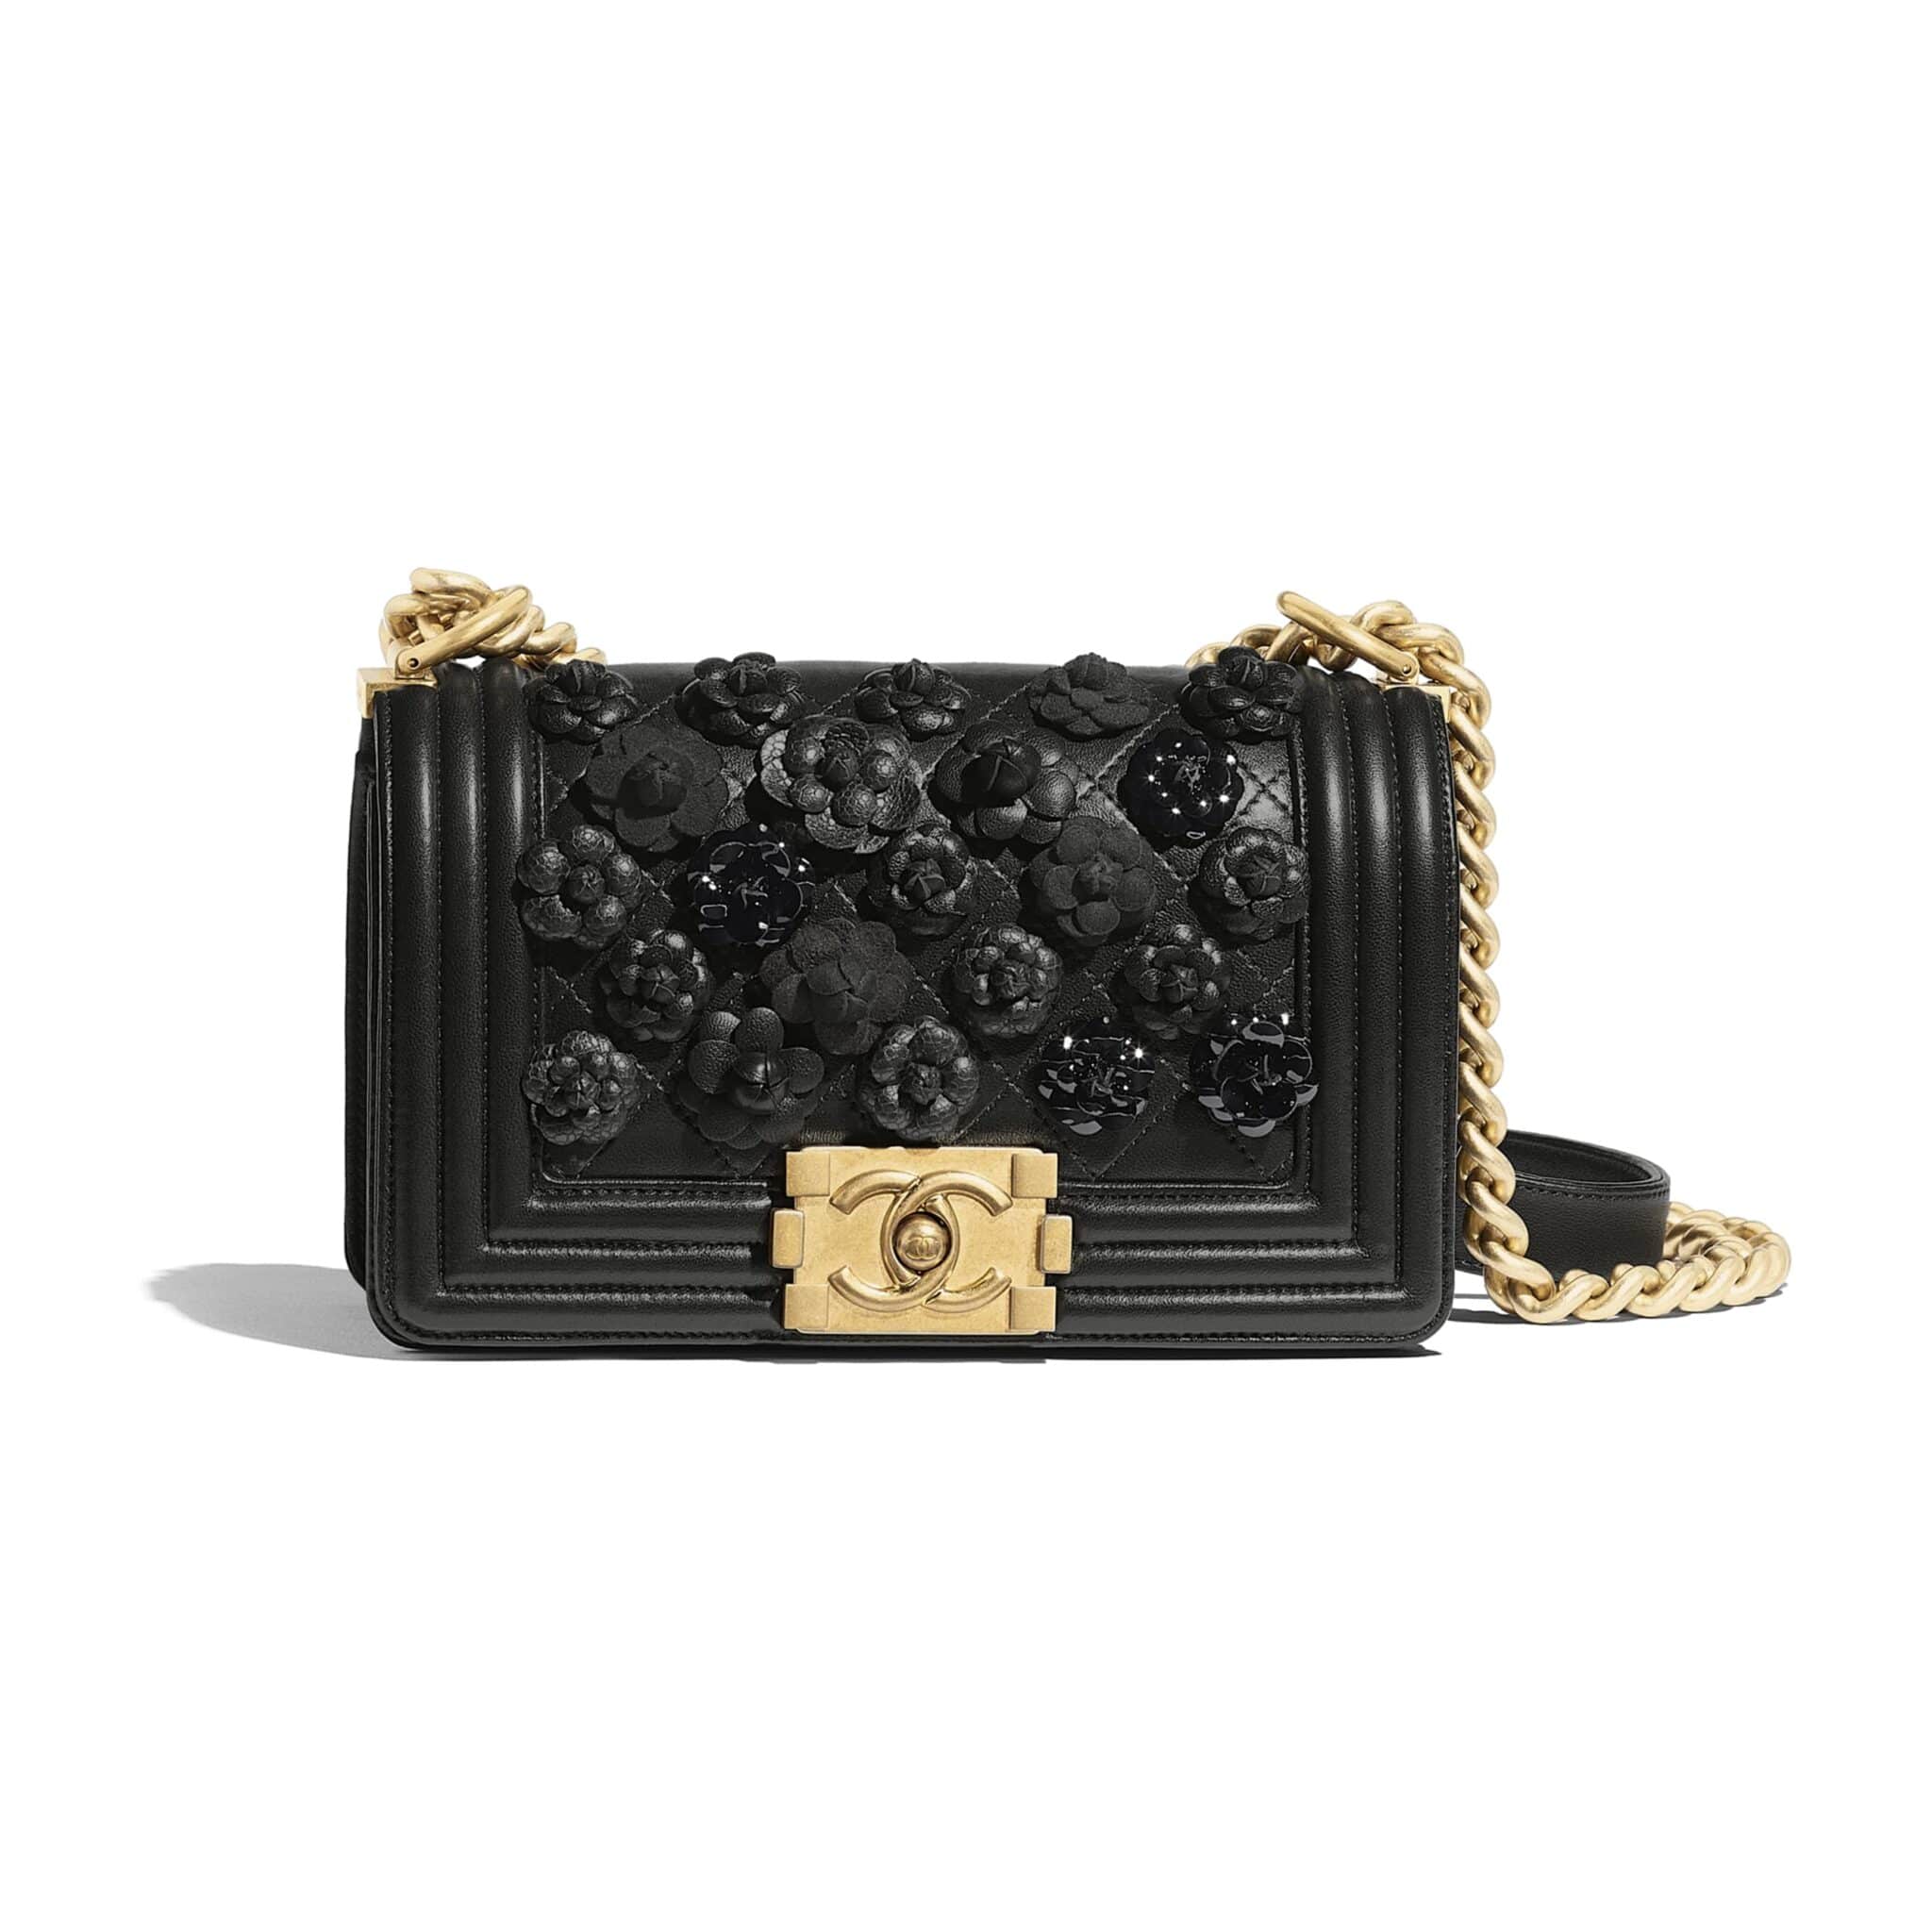 Chanels SupermarketThemed Fall 2014 Bags in Stores Now Look  Surprisingly Wearable  PurseBlog